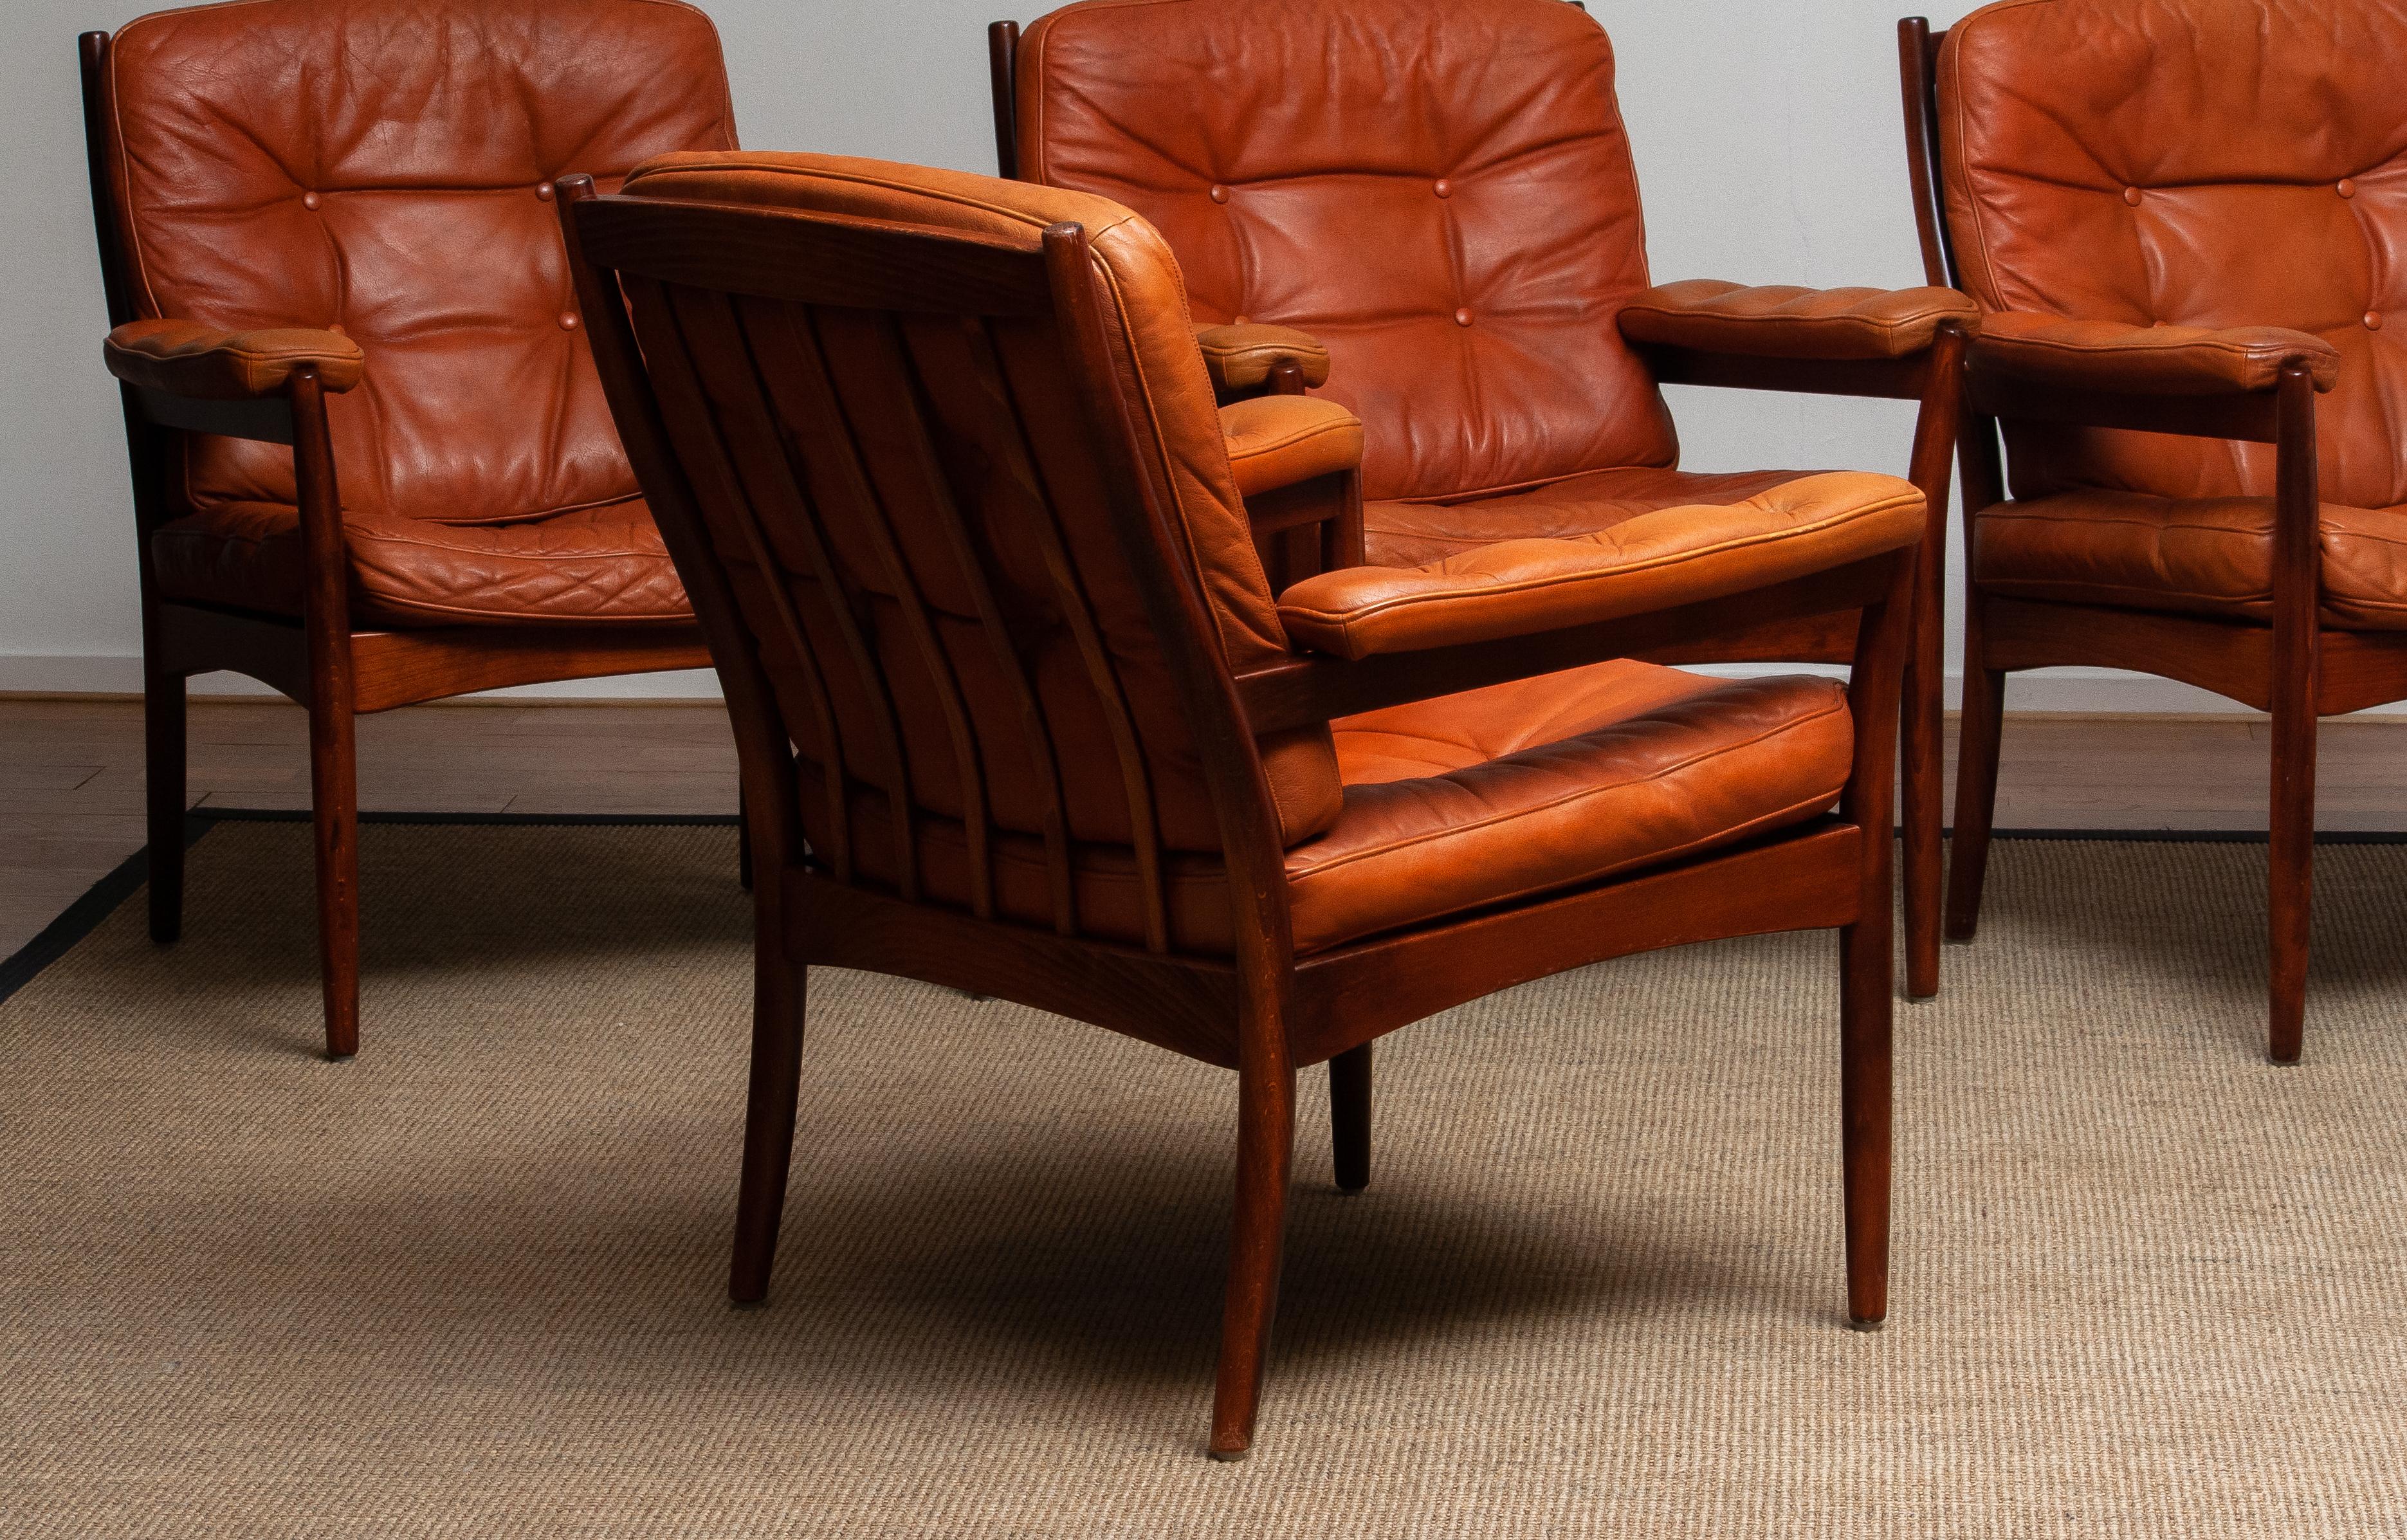 1960s, Four Congac Leather Easy Chairs Made by Göte Design Nässjö Sweden 5